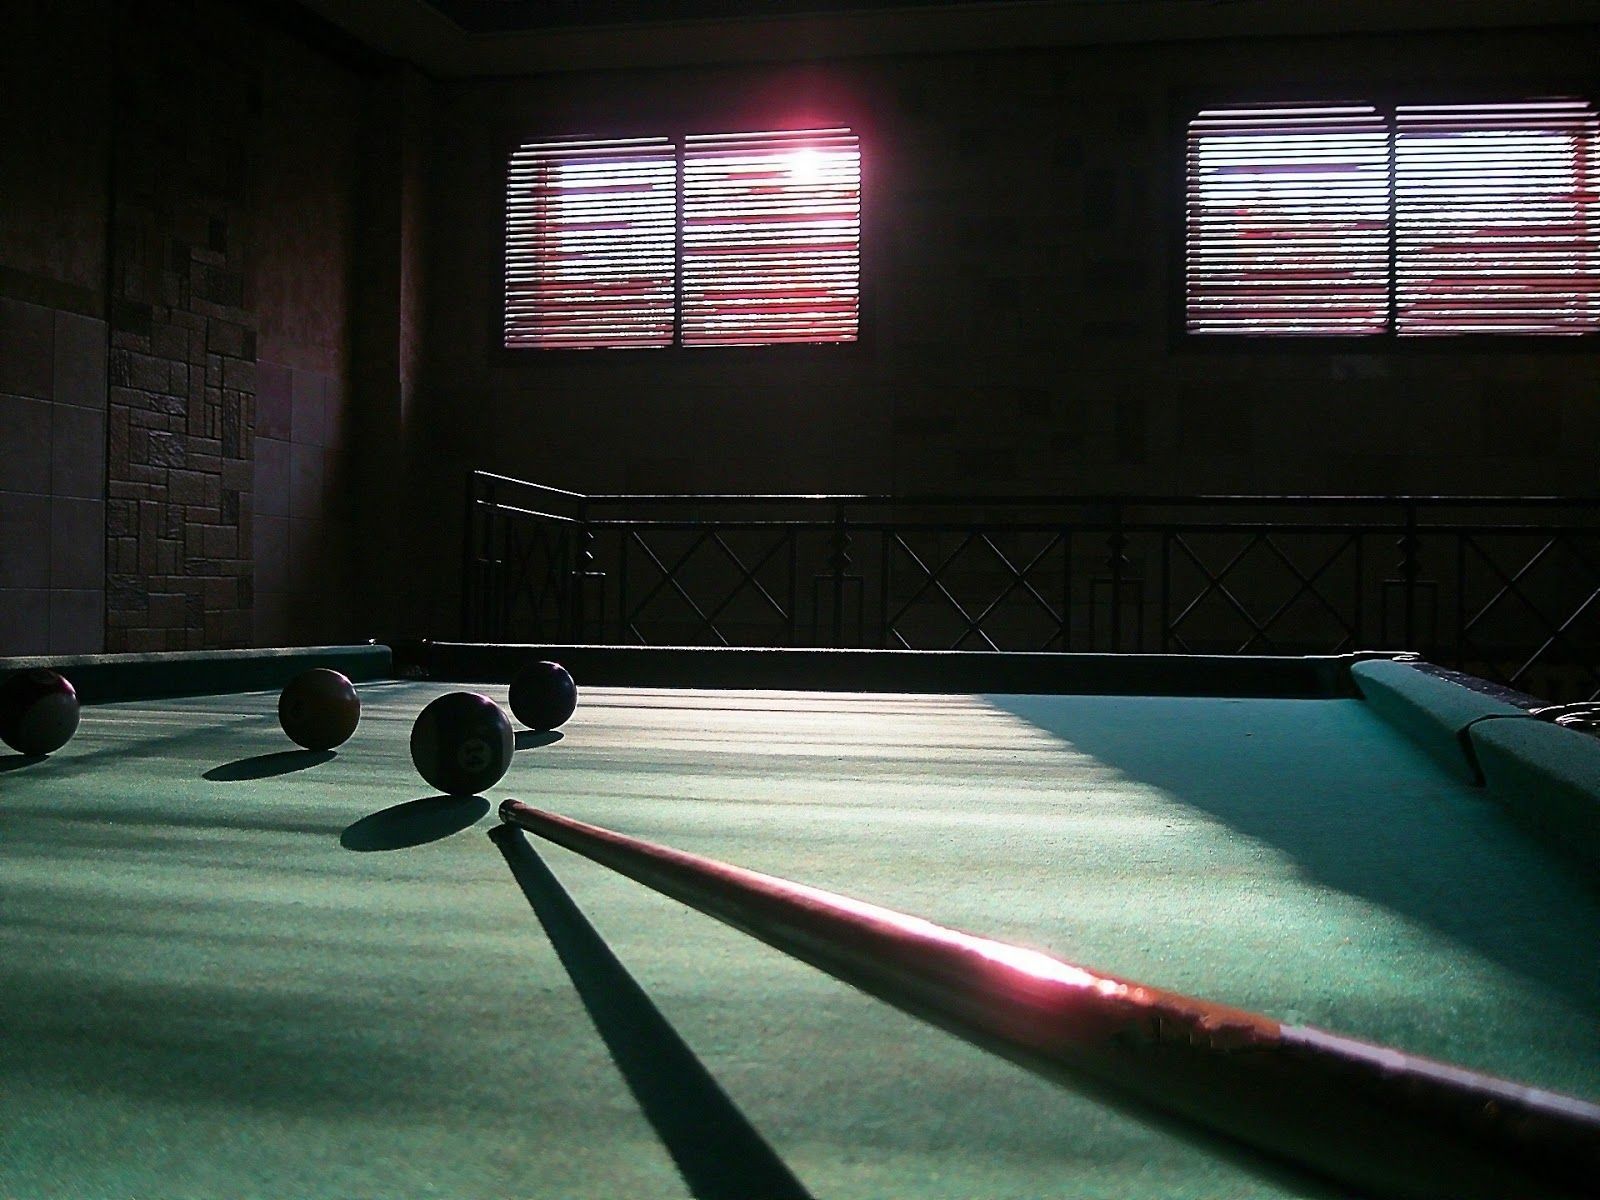 Top 42 Beautiful Pool Table And Snooker Wallpapers In HD | HD ...